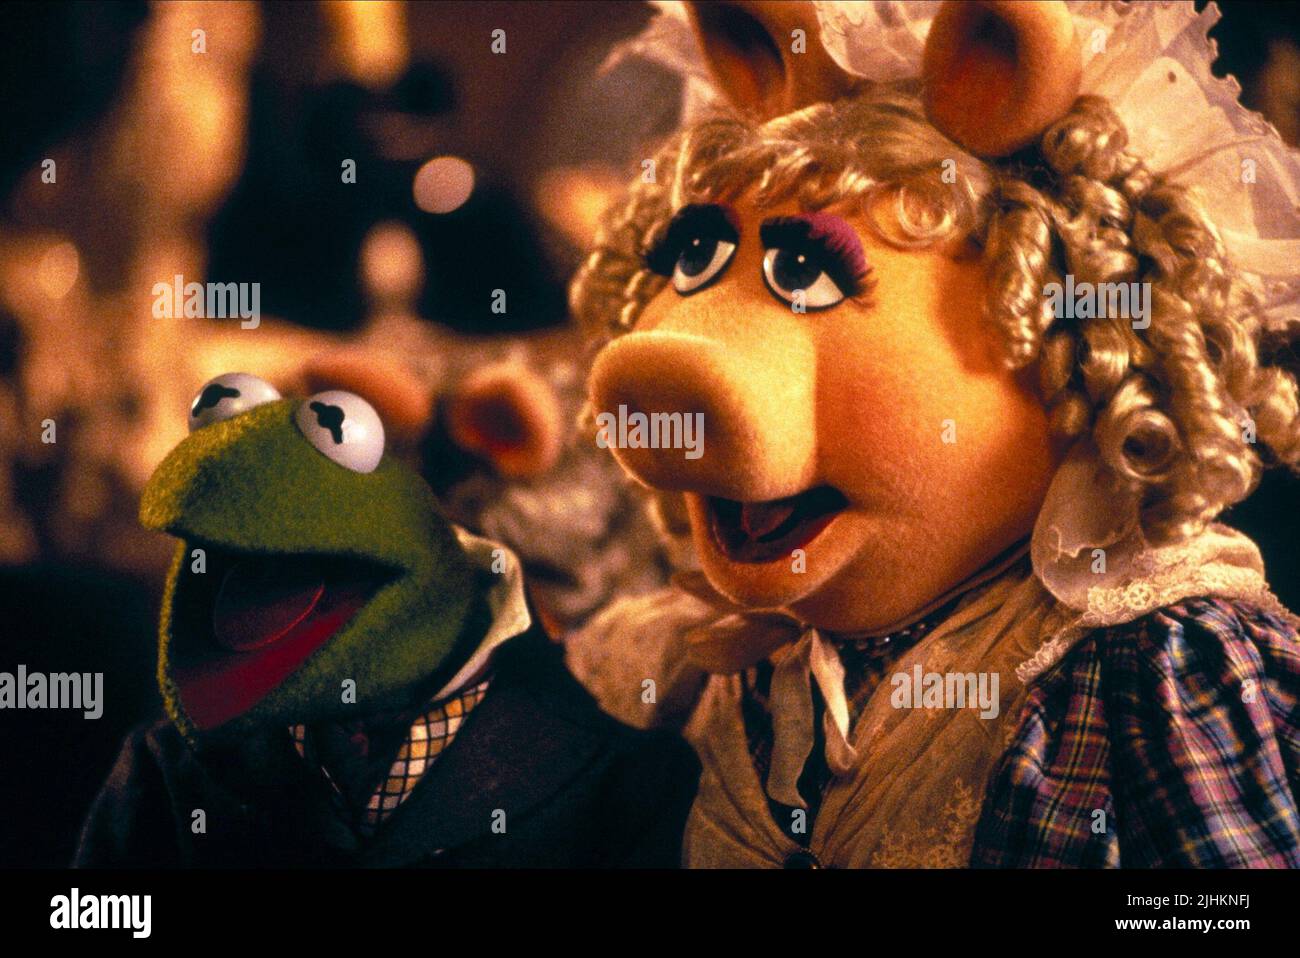 KERMIT THE FROG AS BOB CRATCHIT, MISS PIGGY AS EMILY CRATCHIT, THE MUPPET CHRISTMAS CAROL, 1992 Stock Photo